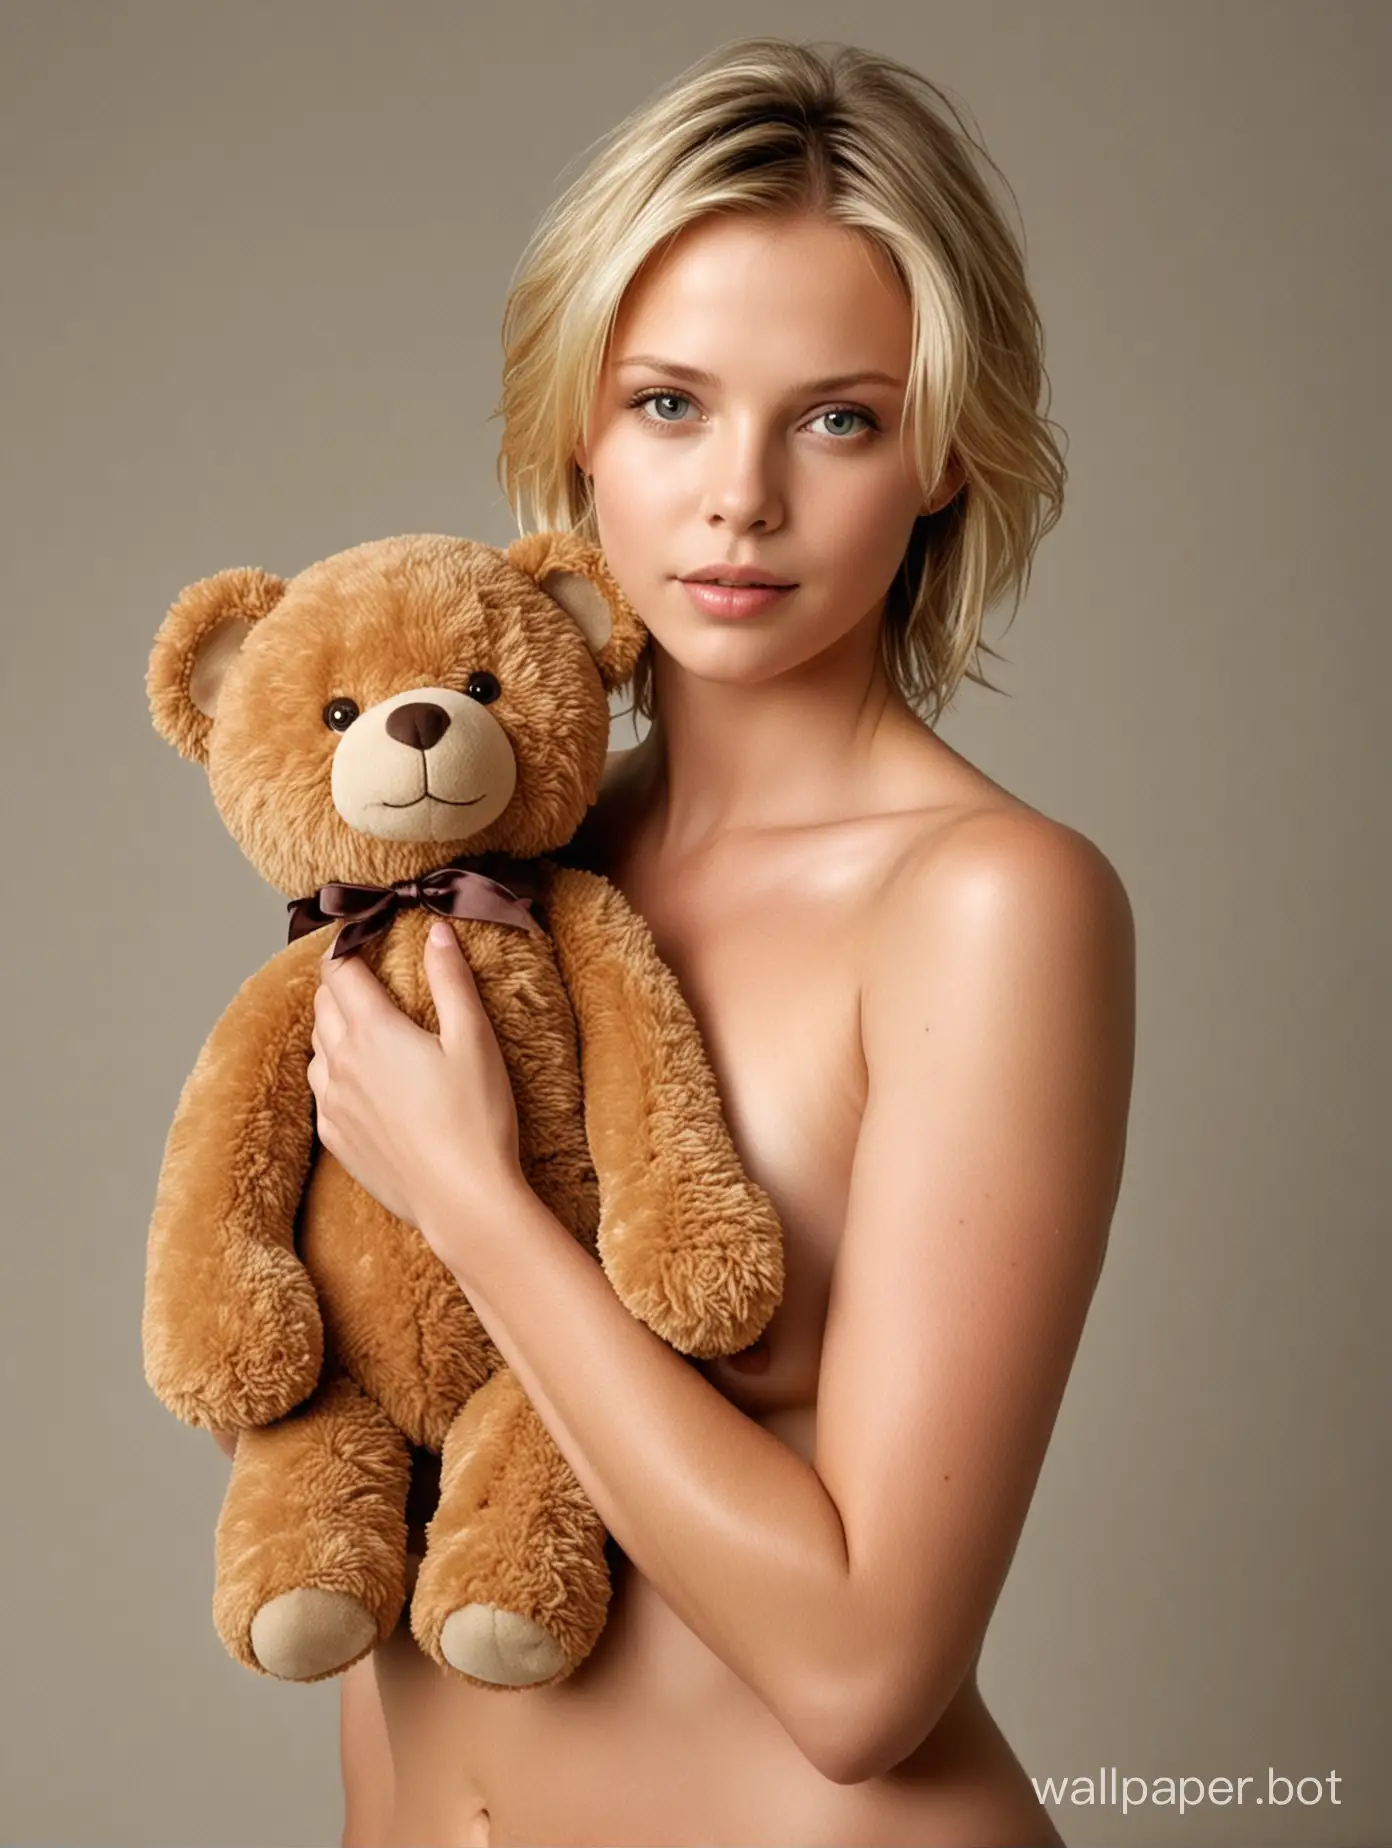 Photo shoot of a naked girl 10 years old Charlize Theron with a teddy bear